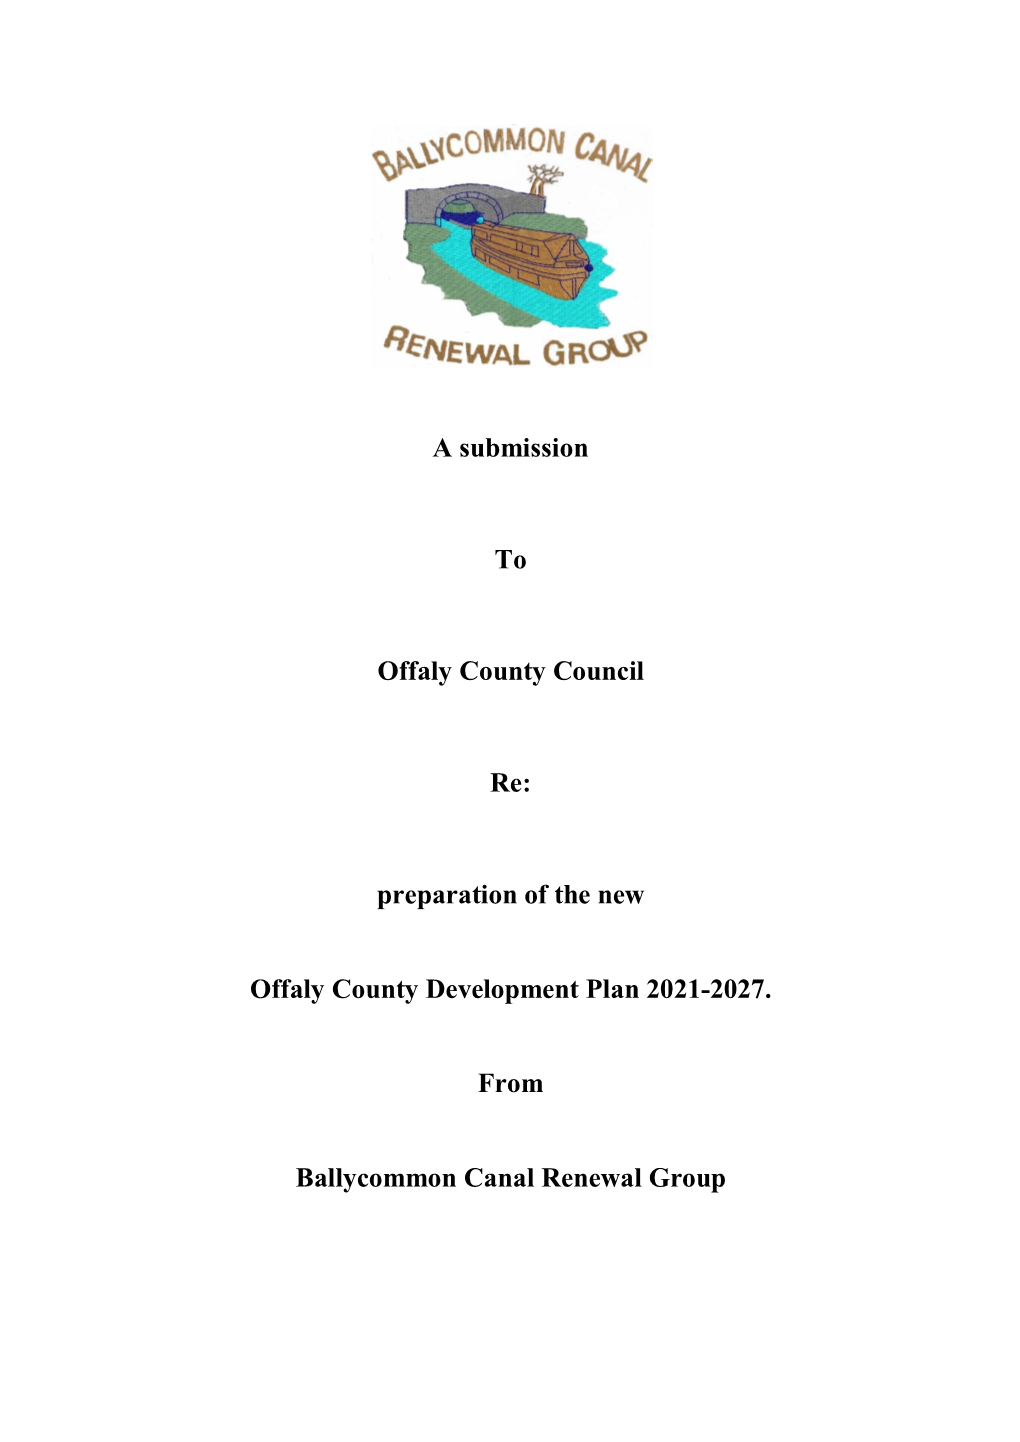 Preparation of the New Offaly County Development Plan 2021-2027